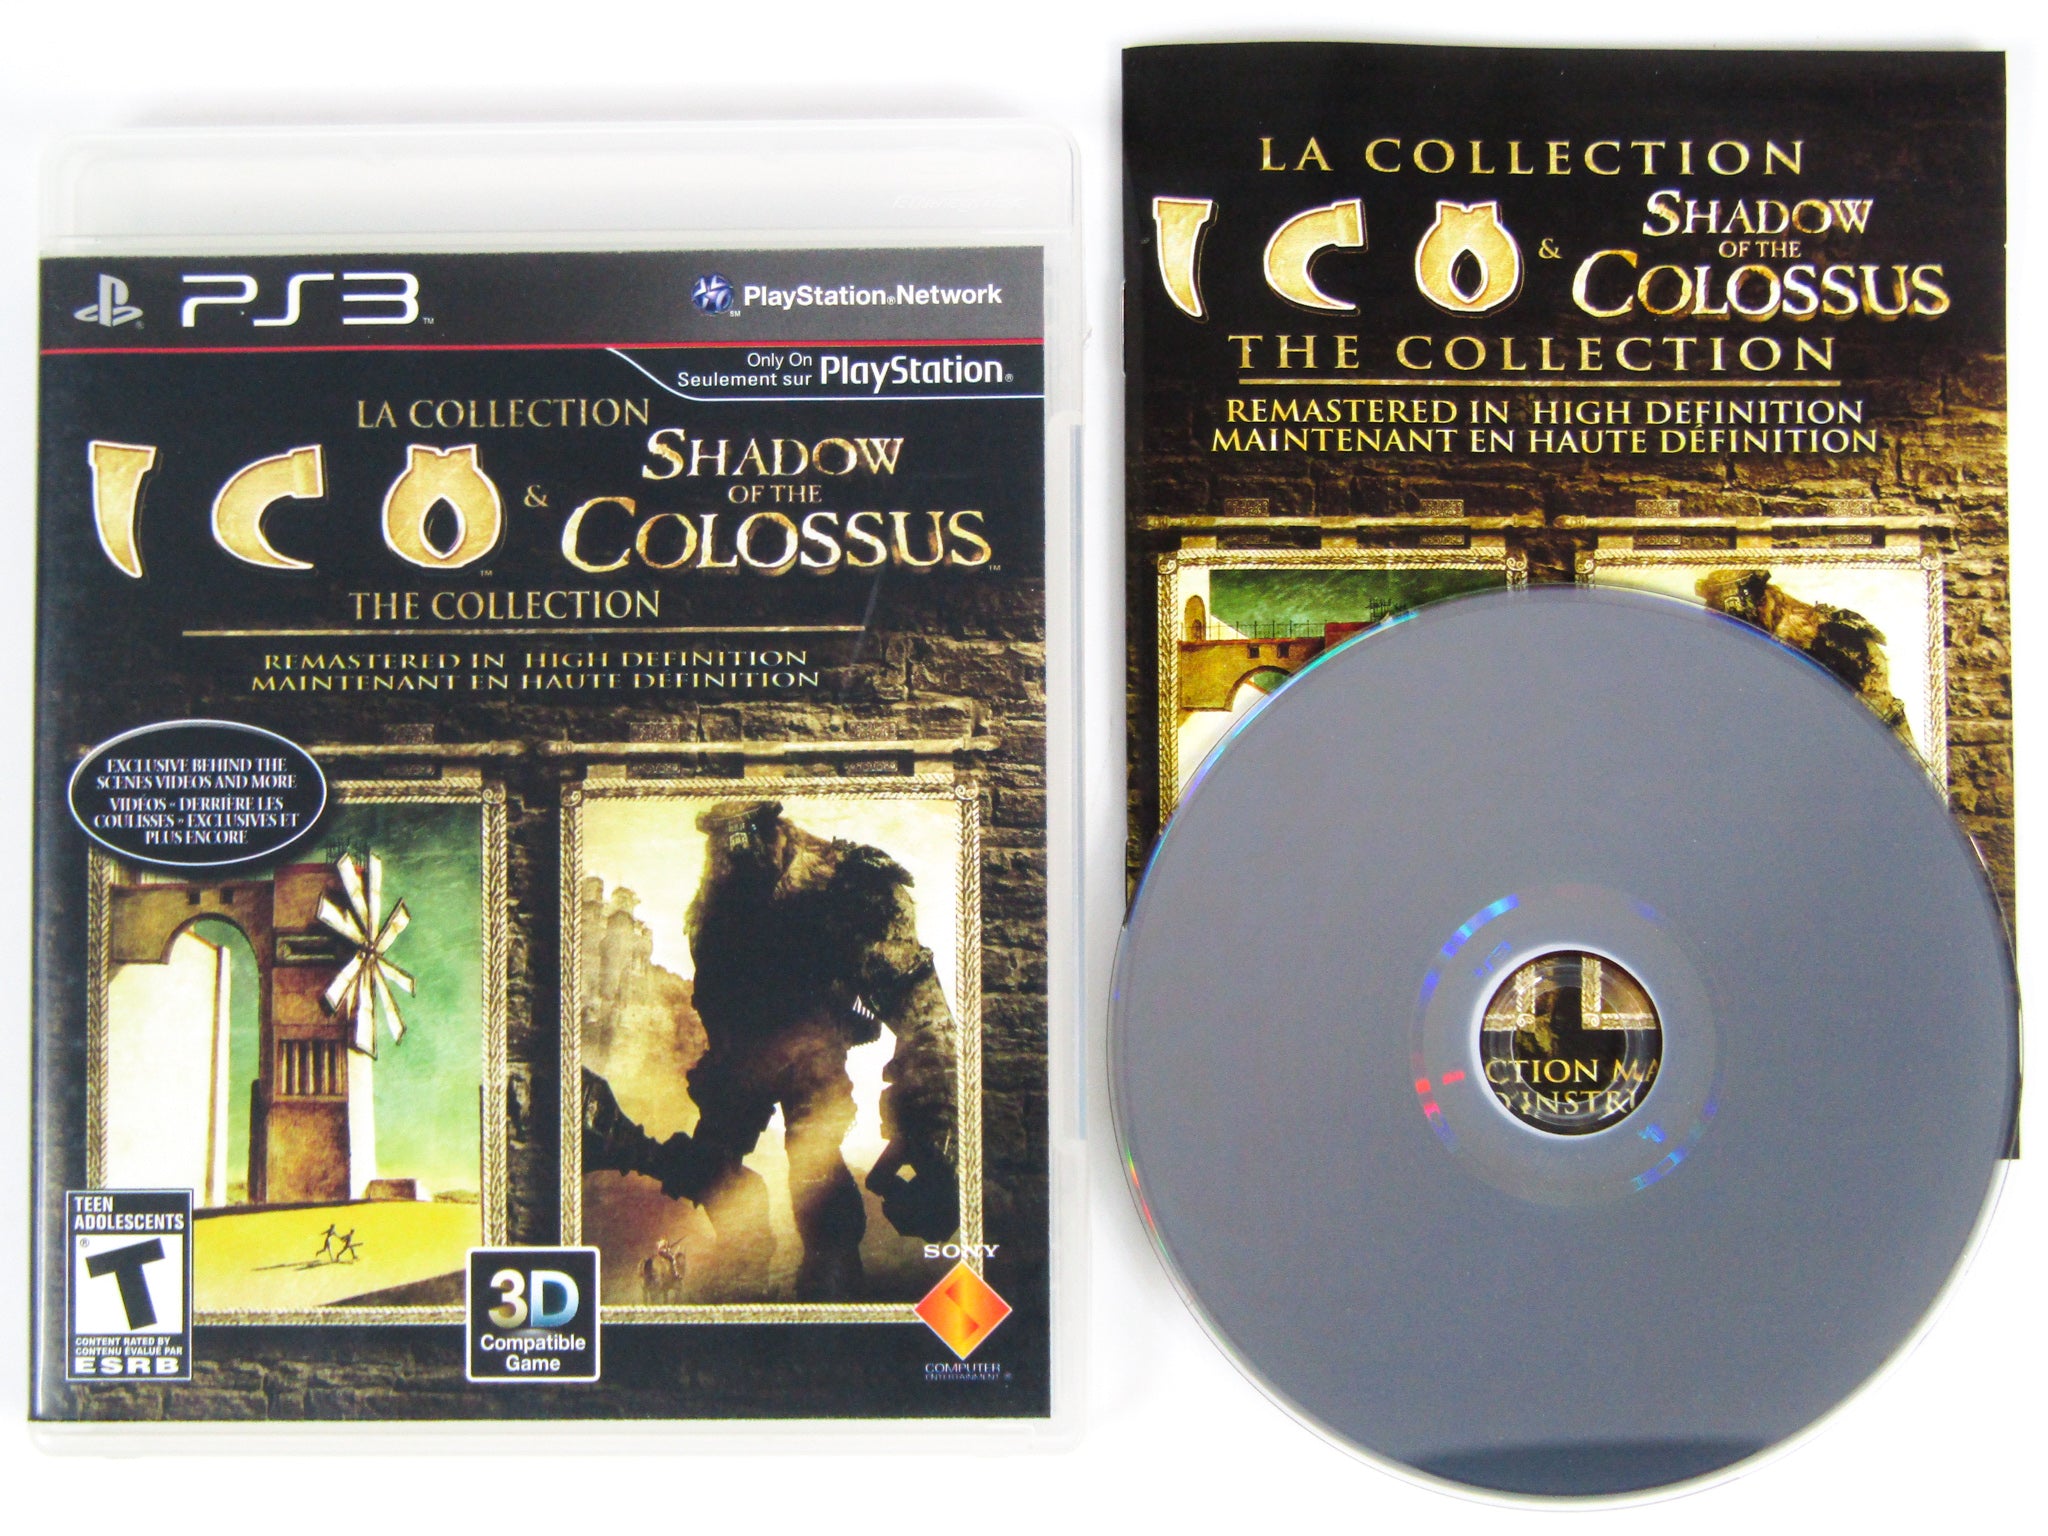 ICO and Shadow Of the Colossus PS3 by Tomyblues on DeviantArt